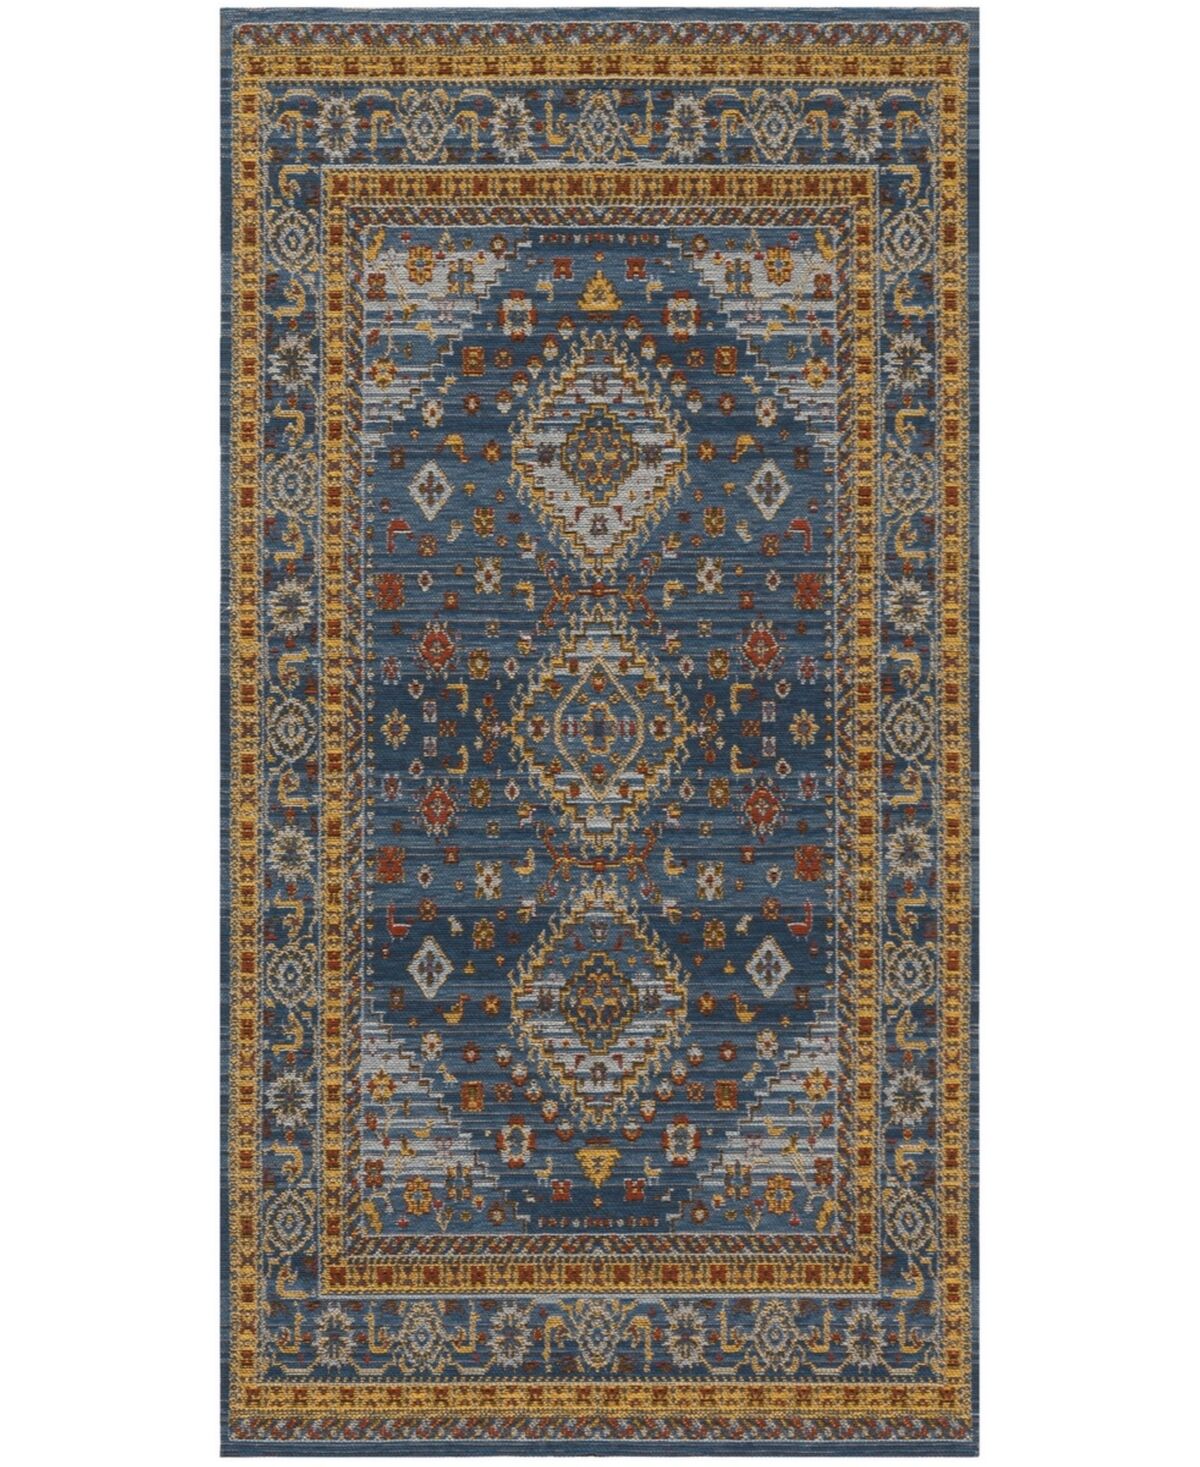 Safavieh Classic Vintage CLV114 Blue and Gold 4' x 6' Area Rug - Blue